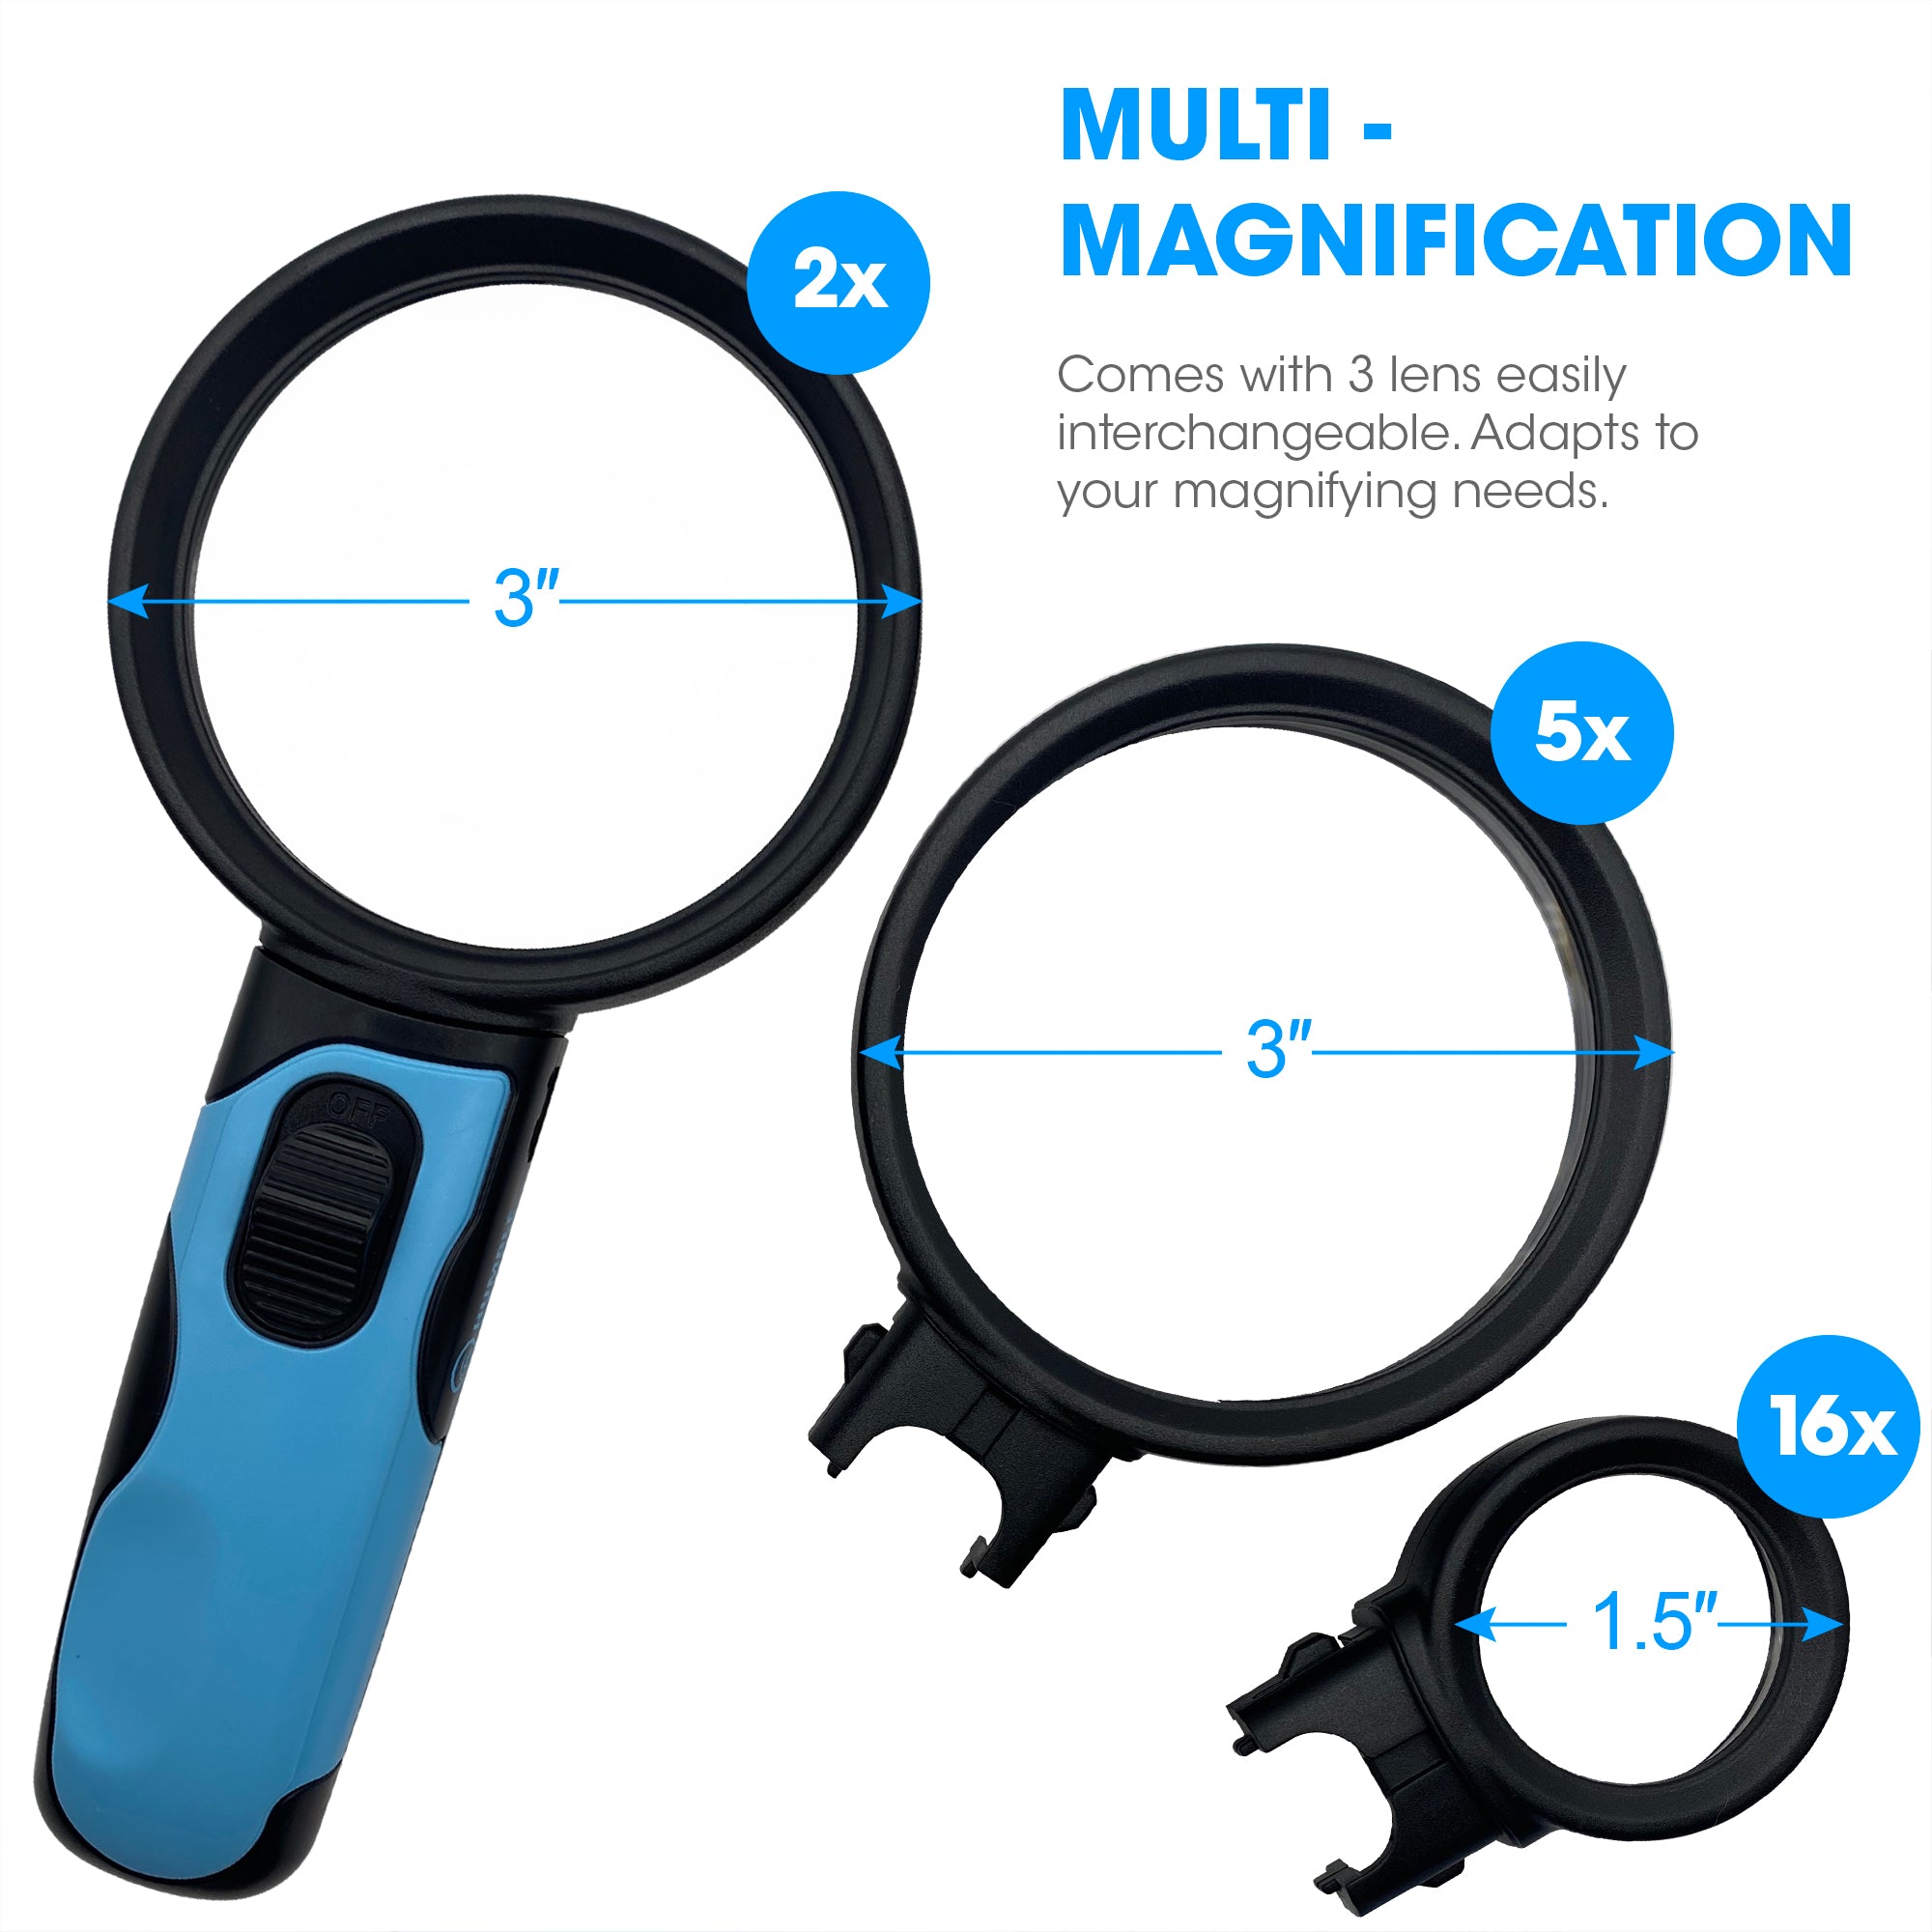 Magnipros Magnifying Glass with Bright LED Lights- 2.5x, 5X, 16x Handheld Magnifying Glass with 3 Interchangeable Lenses-ideal for Seniors, Maps, Macu